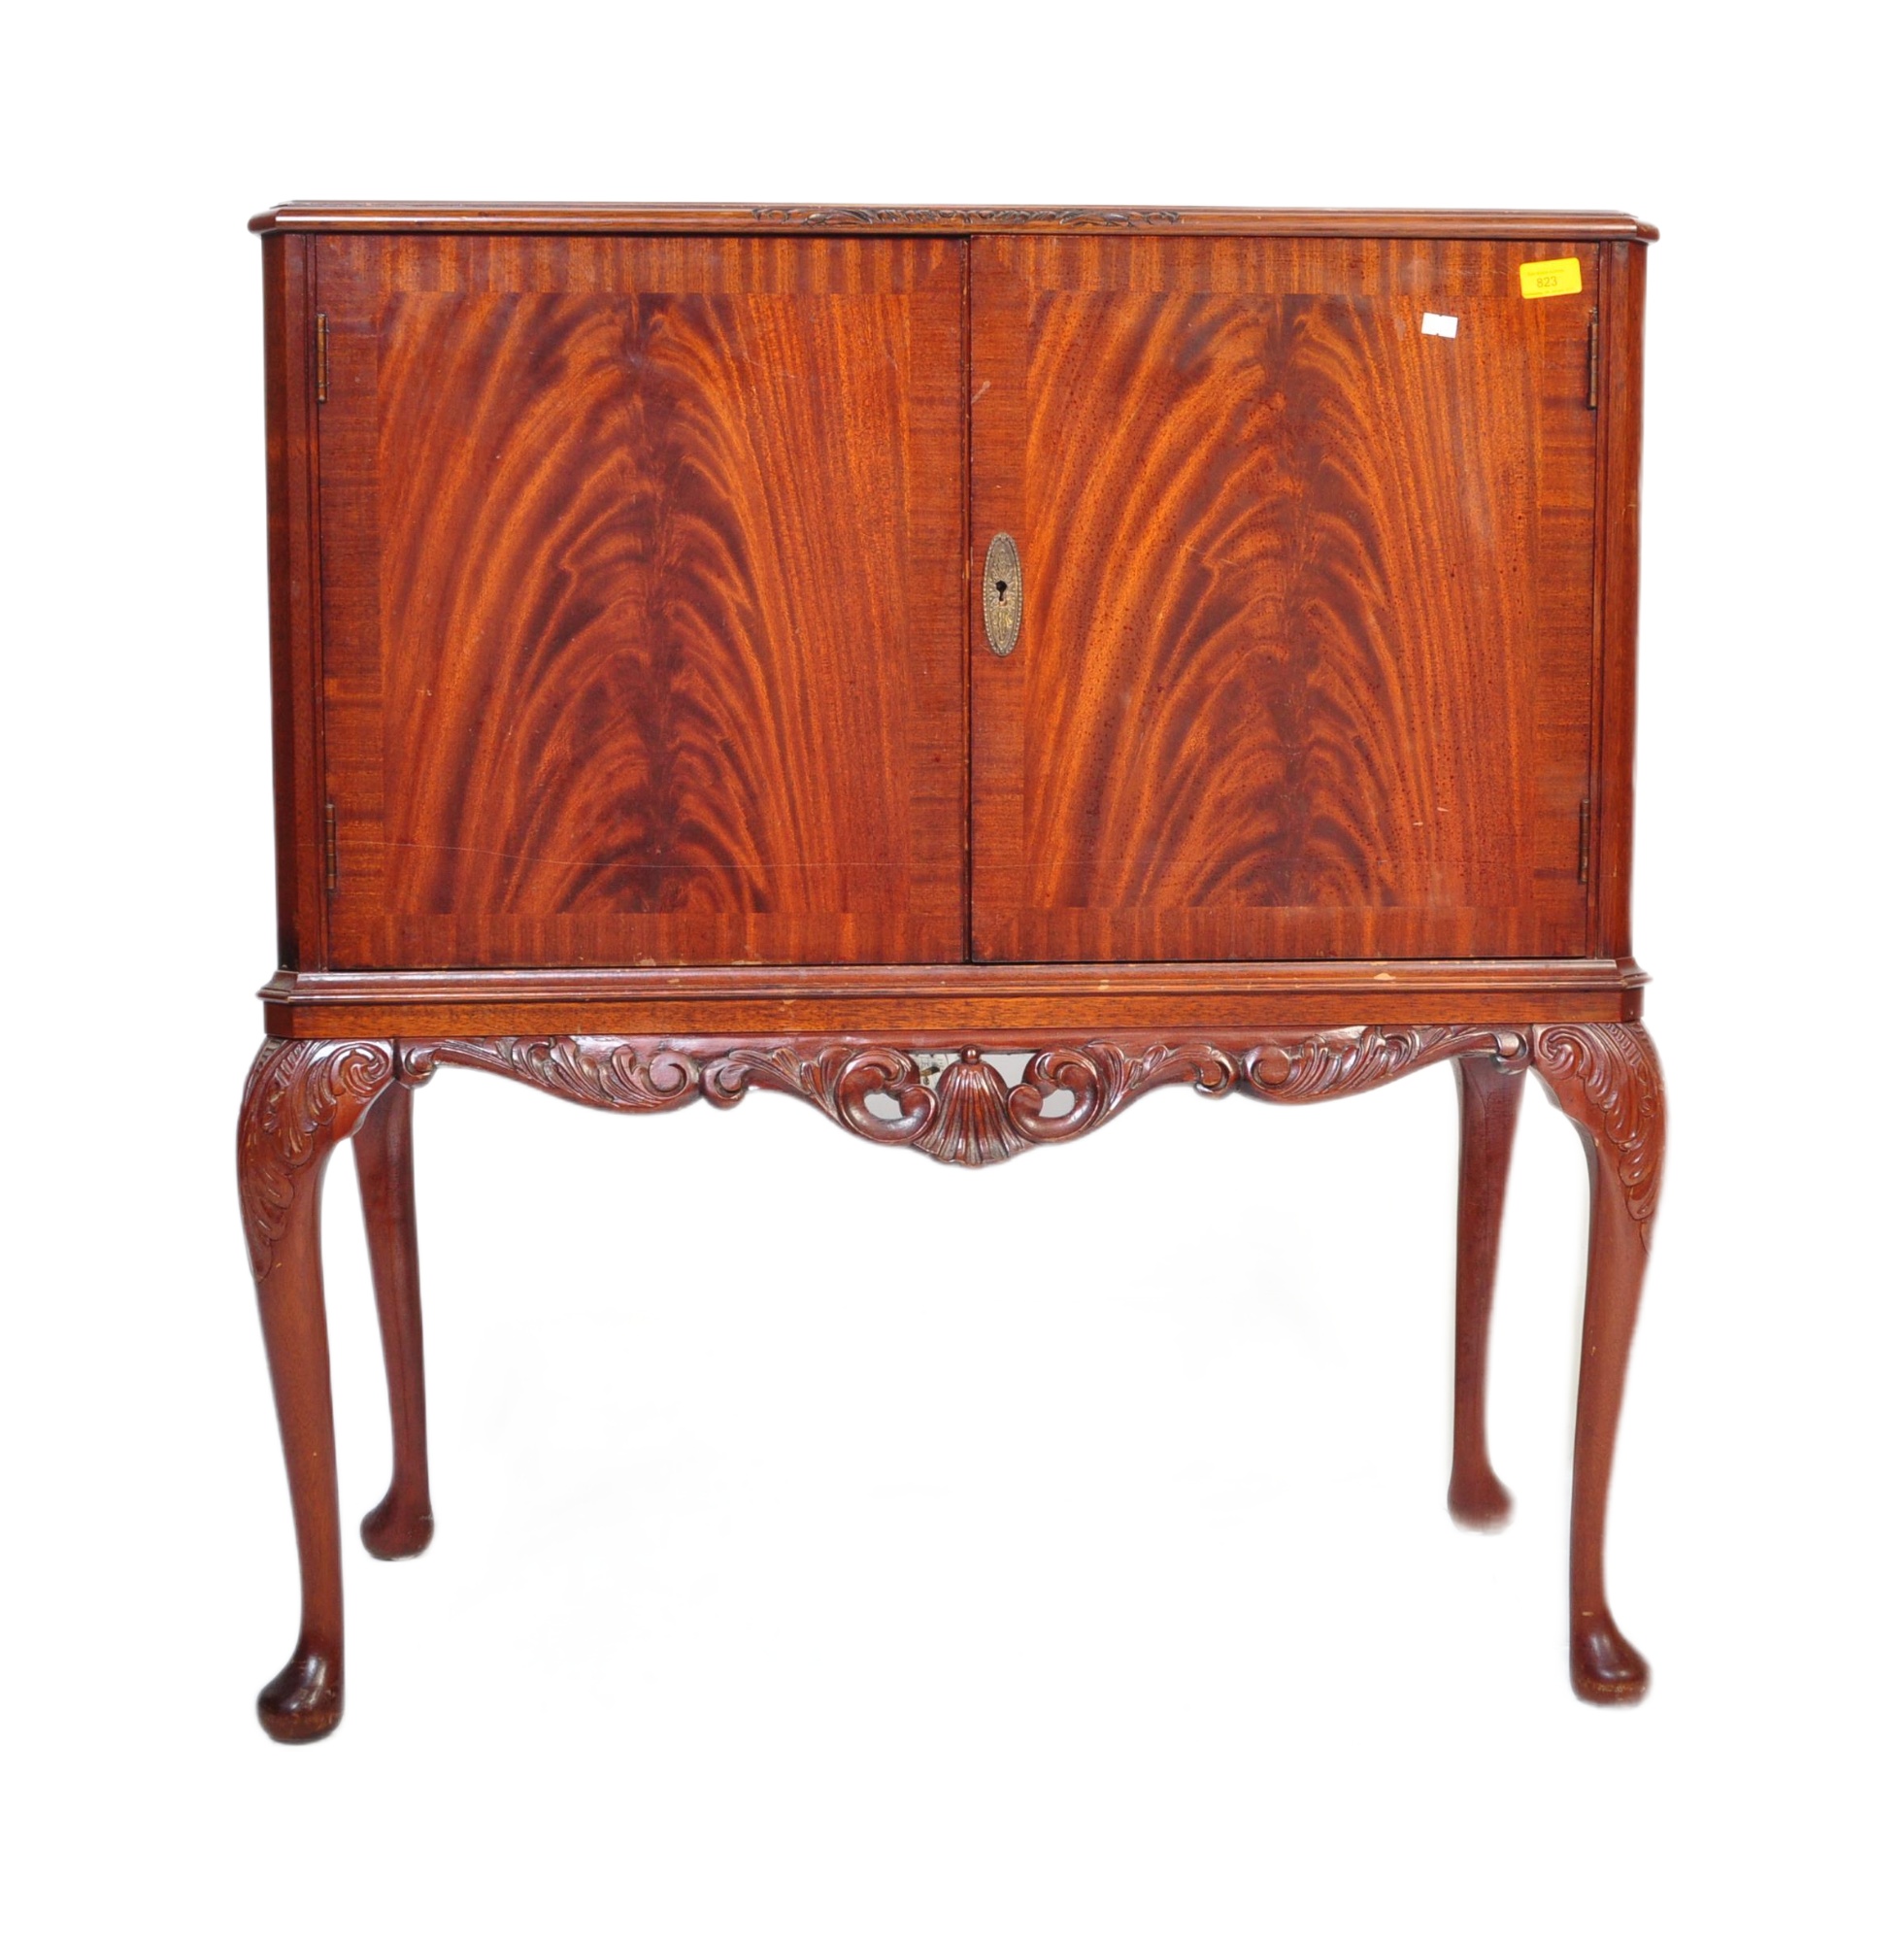 20TH CENTURY WALNUT CHIPPENDALE STYLE DRINKS CABINET